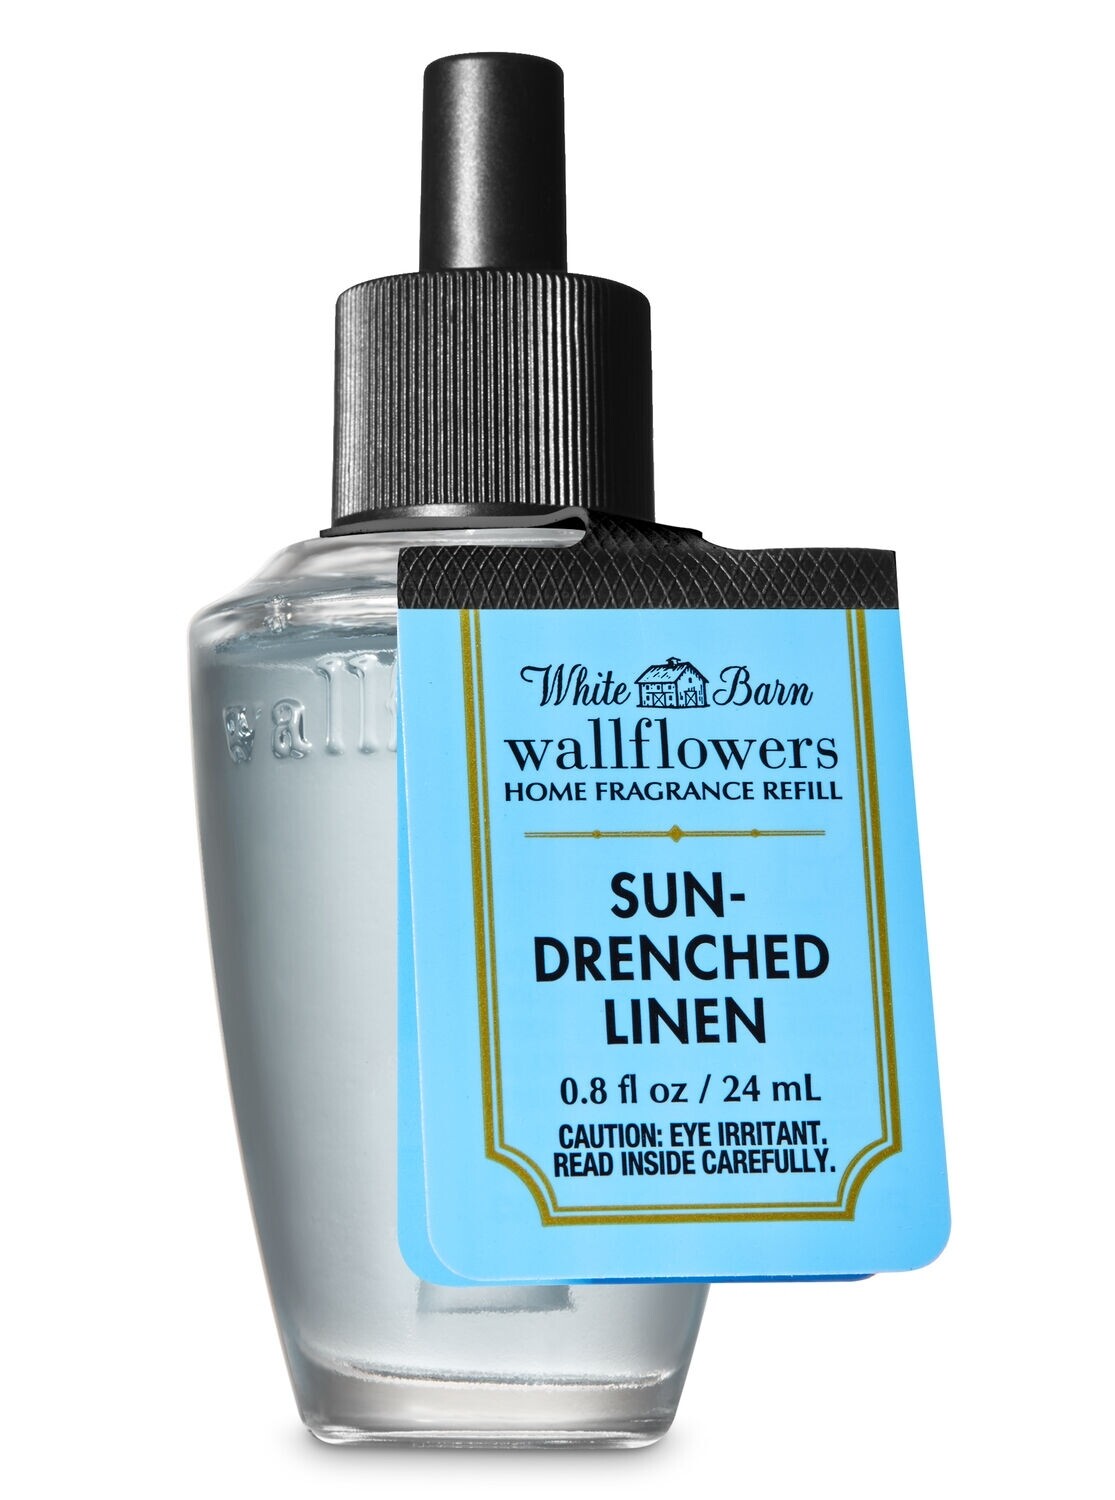 Bath and body works wallflower refill- sun drenched linen 